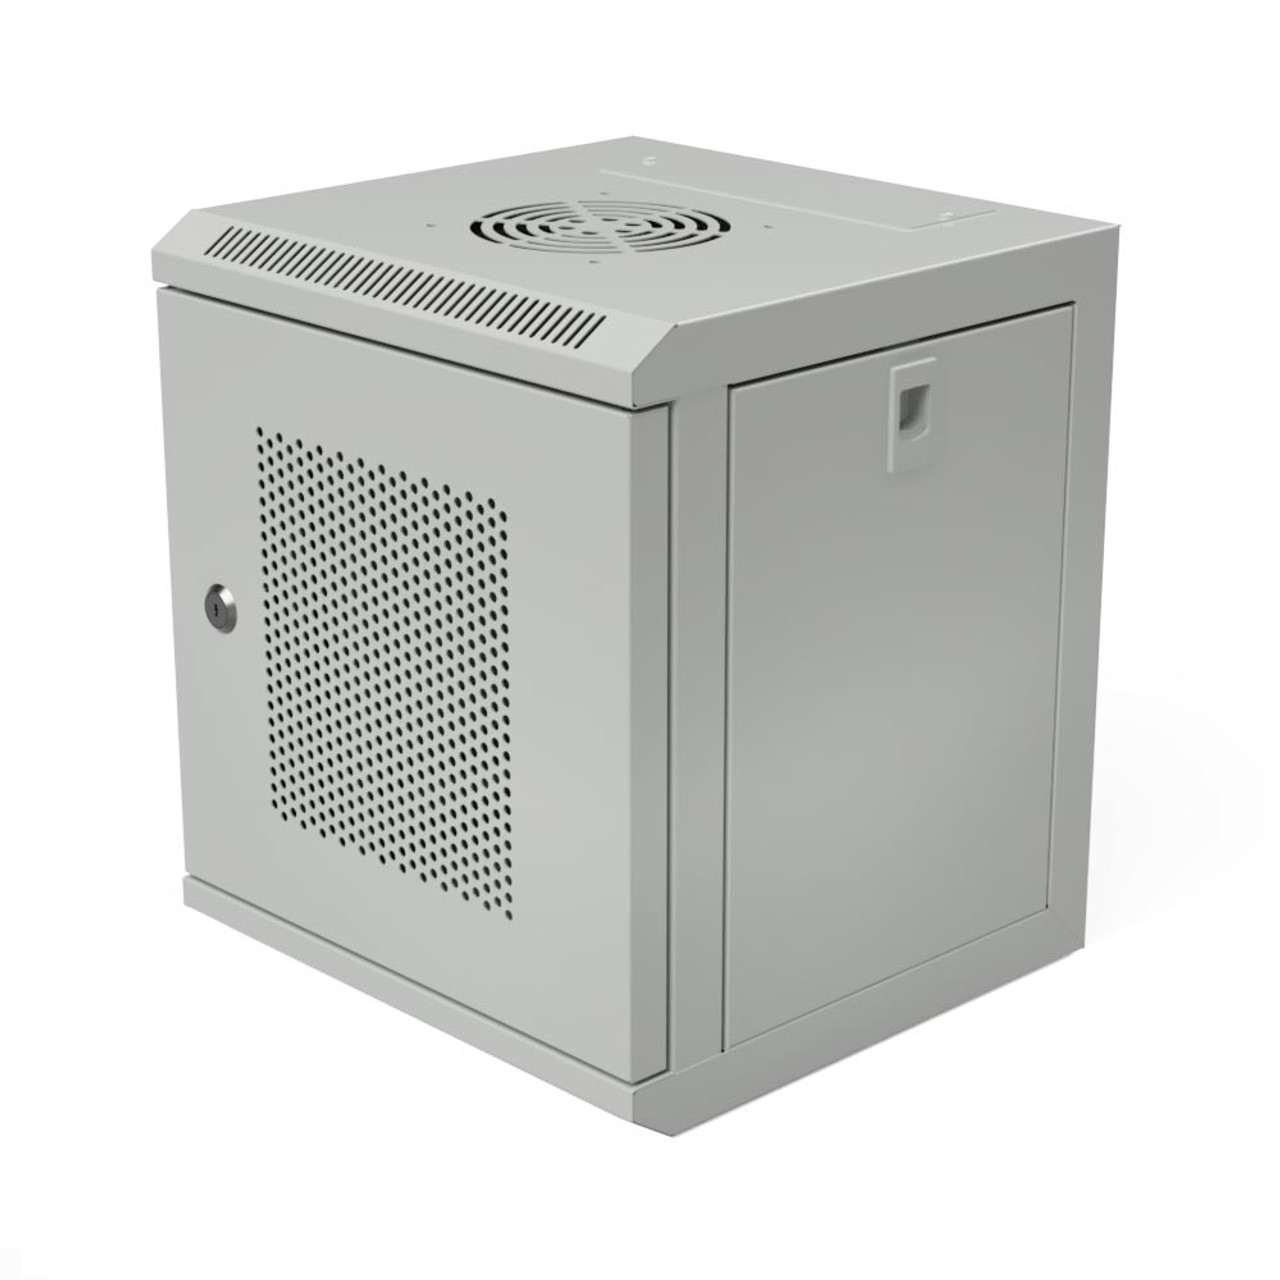 11.8 in Wall Mount Network Cabinet, 6U, Perforated, Gray